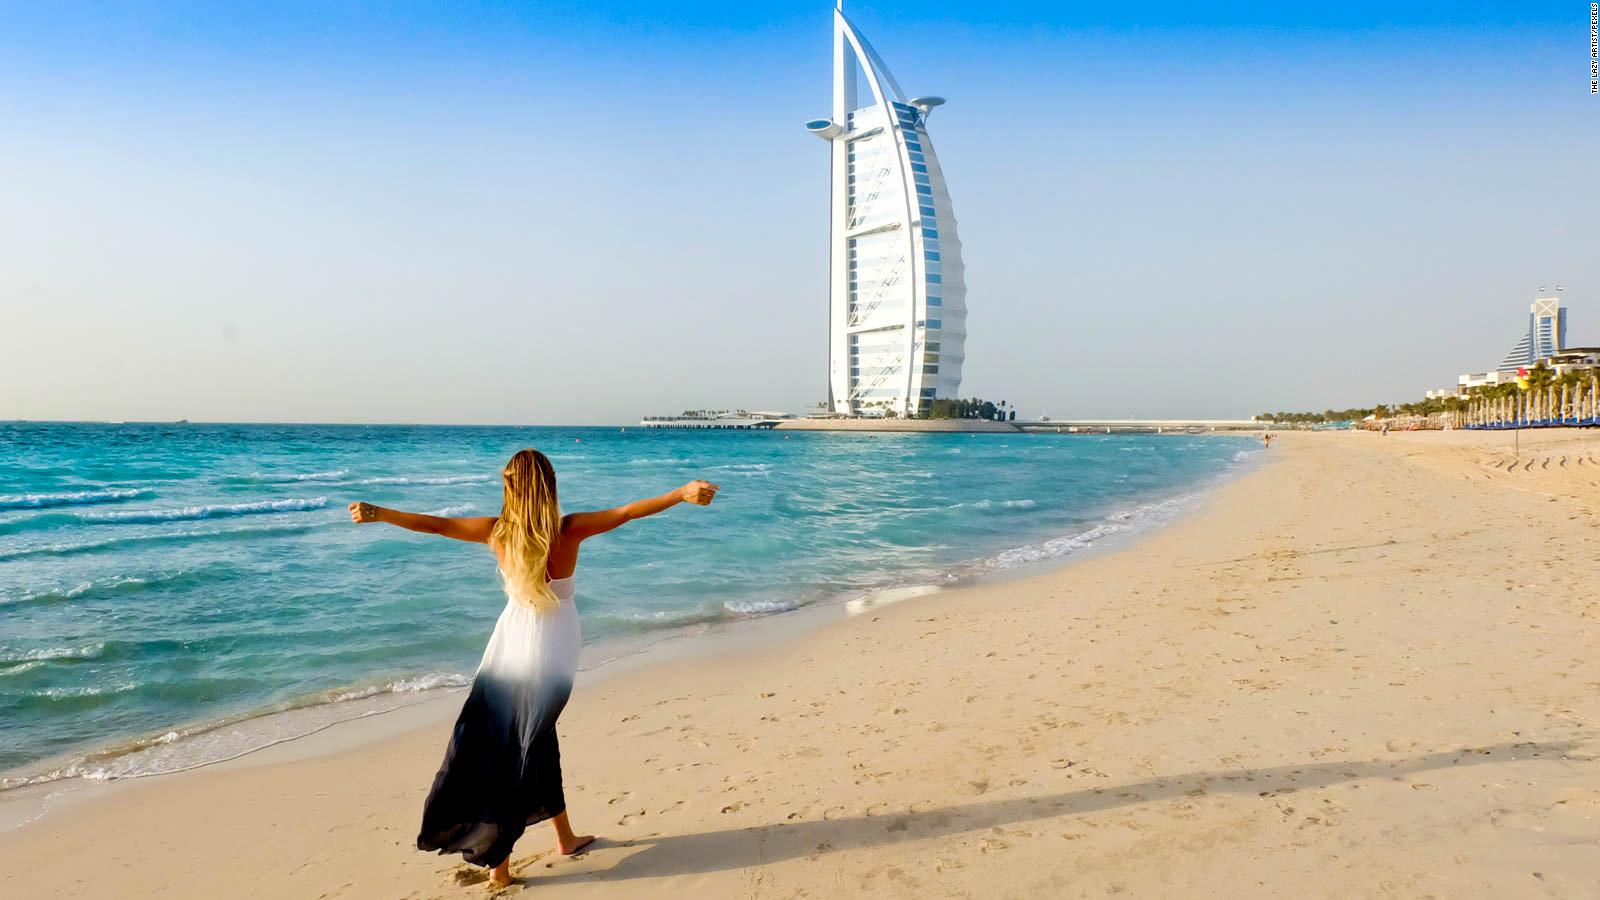 20 of the best beach spots you need to try in Dubai   CNN Travel